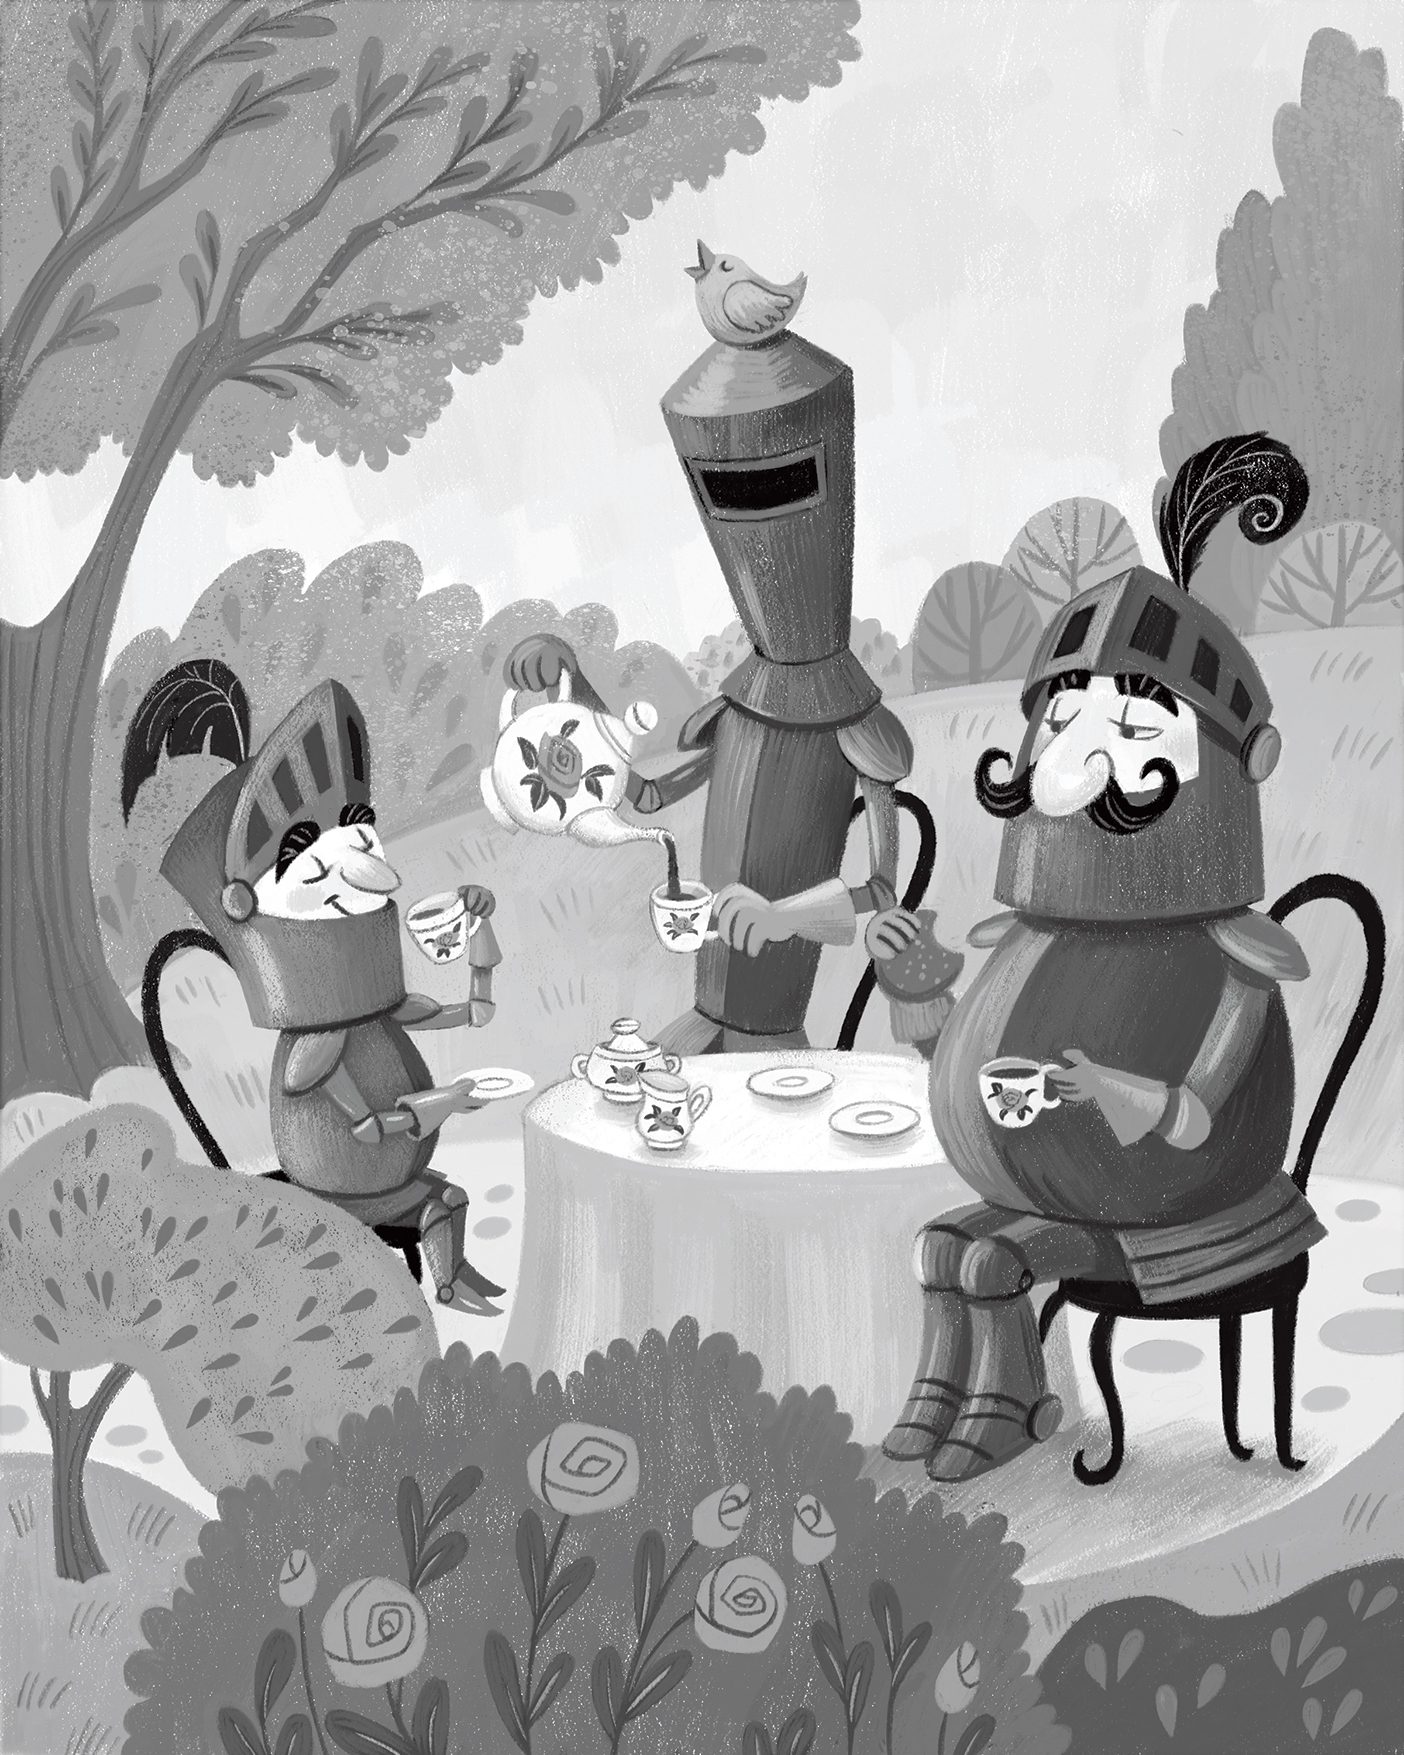 An illustration of 3 knights sitting around a table having a tea party.